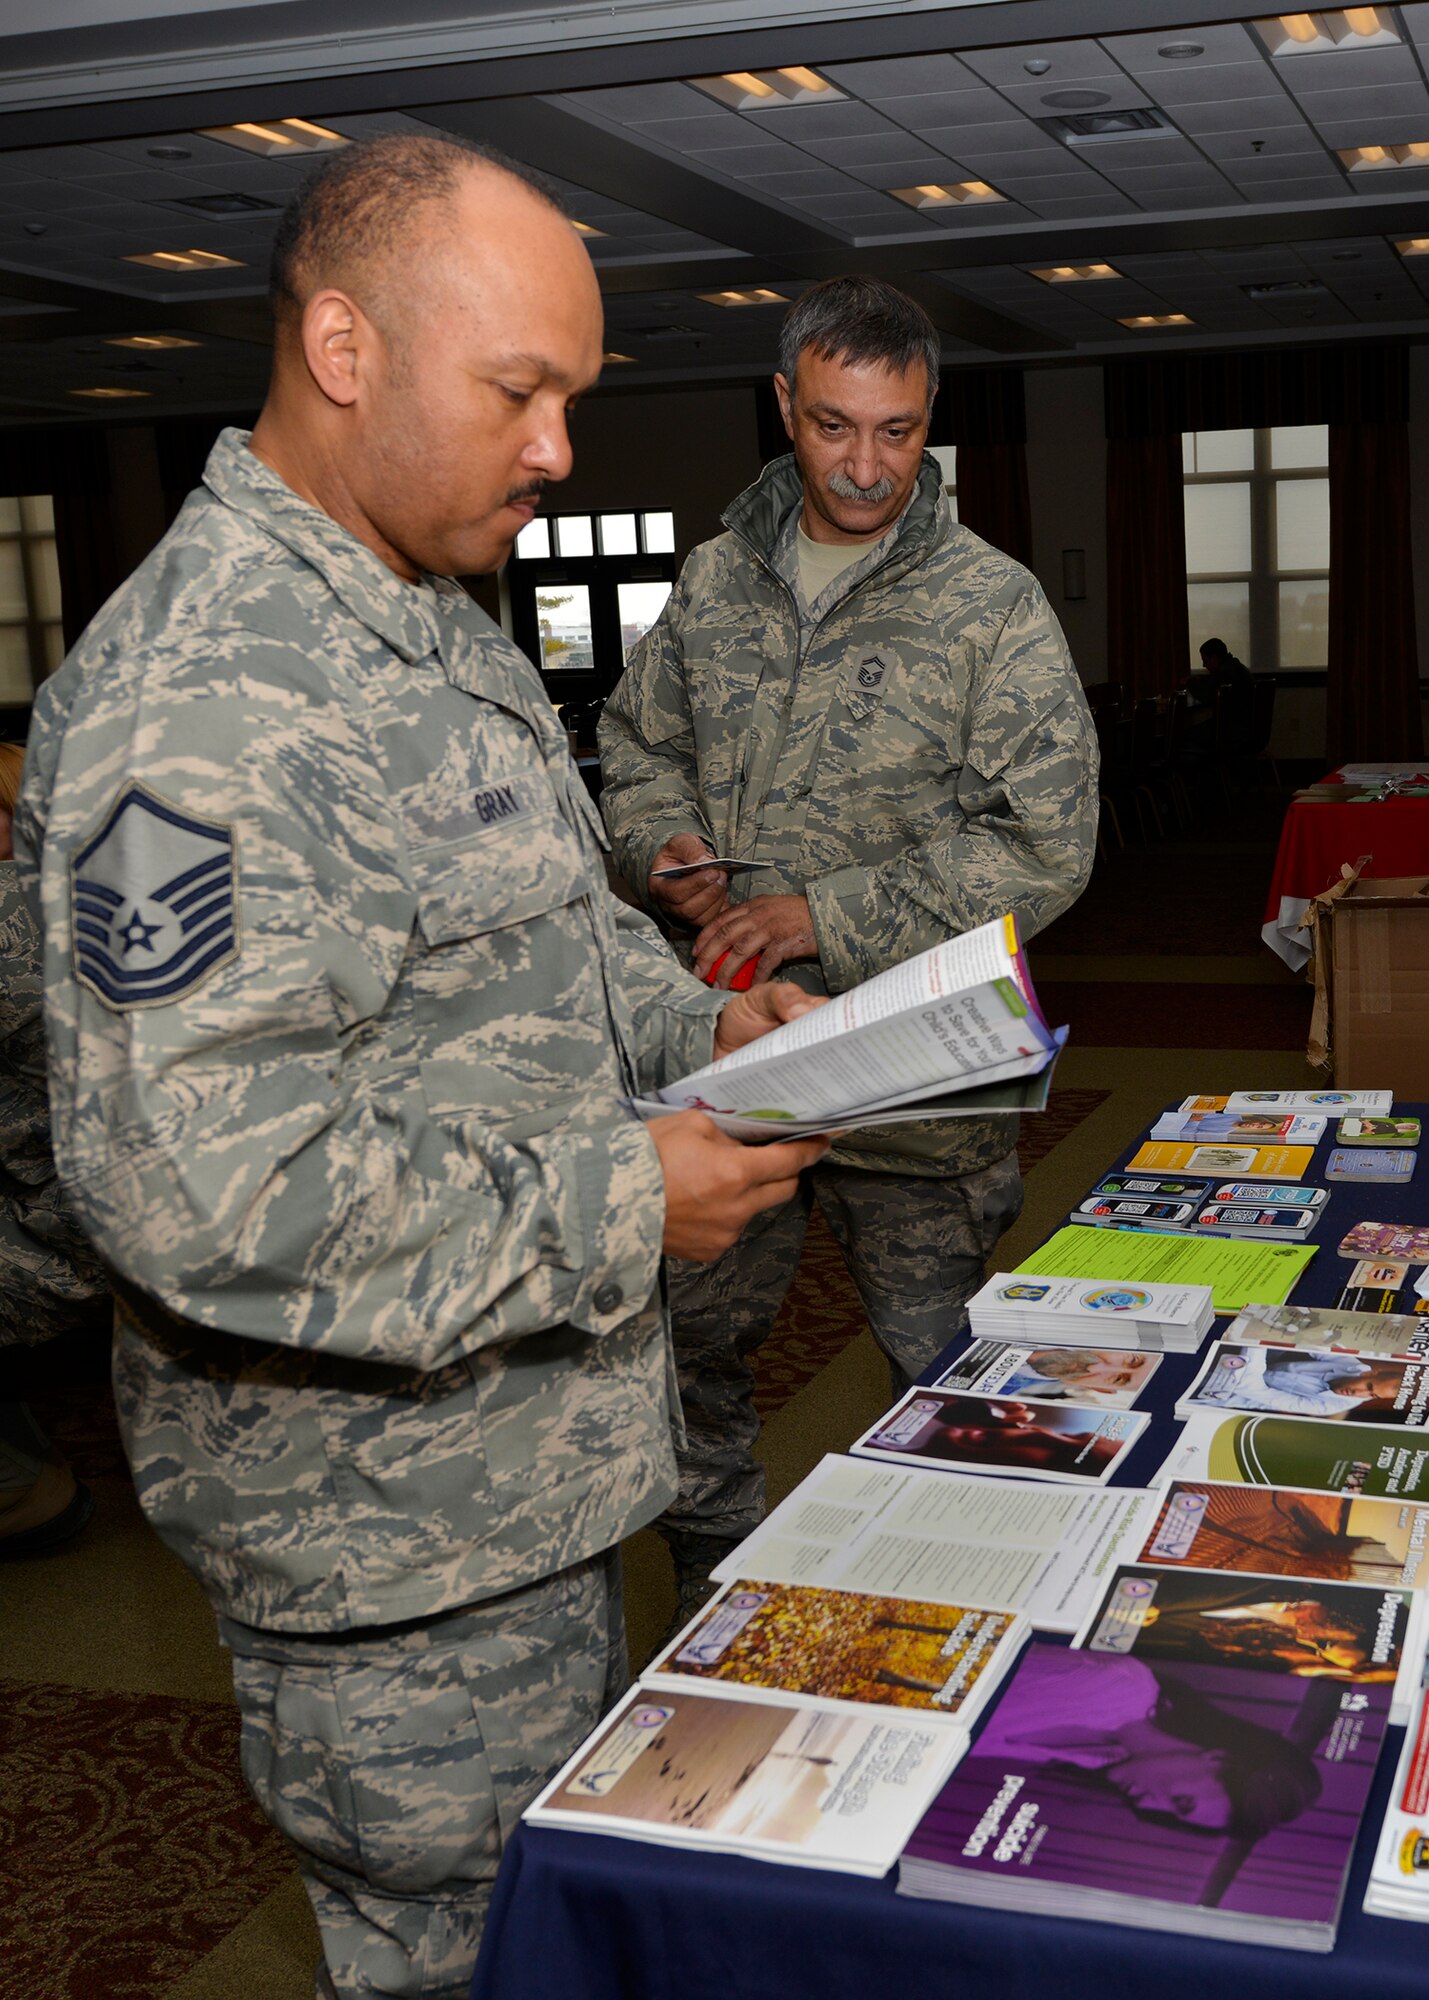 914th Airlift Wing Airmen view information provided by the Air Force Reserve Psychological Health Advocate Program at the Niagara Falls Air Reserve Station Community Activity Center, April 4, 2014. PHAP is a free and confidential resource provider specifically for Air Force Reservists. Some areas that PHAP assists the reservists and families with are family counseling, child and teenager concerns, marriage retreats, alcohol and substance abuse, suicide prevention, mental health issues, Post Traumatic Stress Disorder, anger management, and domestic violence. (U.S. Air Force photo by Tech. Sgt. Joseph McKee)